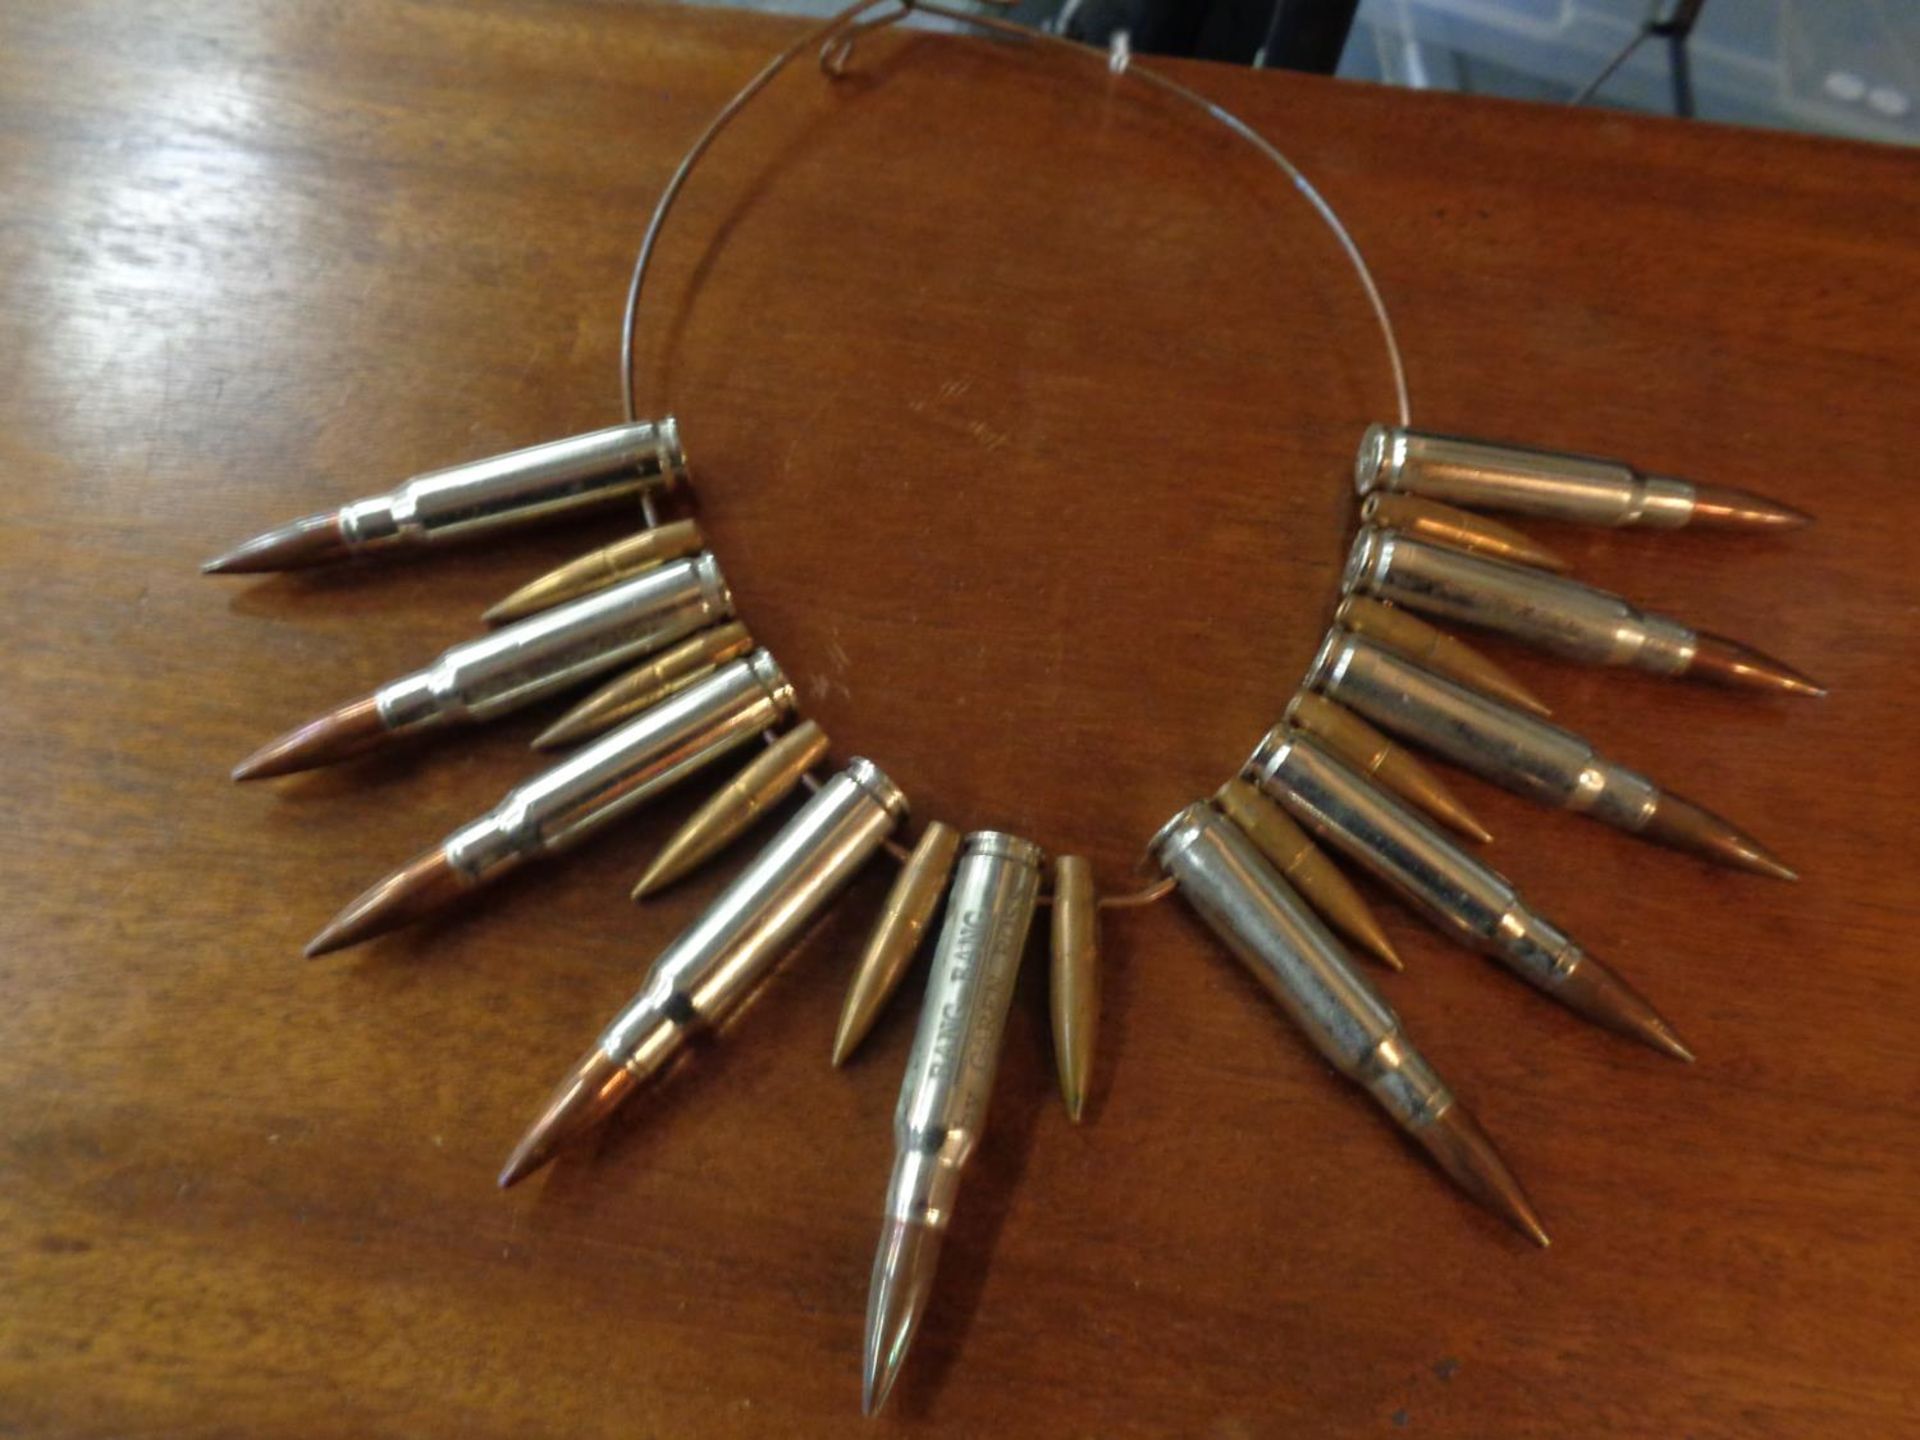 A NECKLACE MADE OF BULLETS STAMPED 'BANG BANG BY CAREN ROSS'